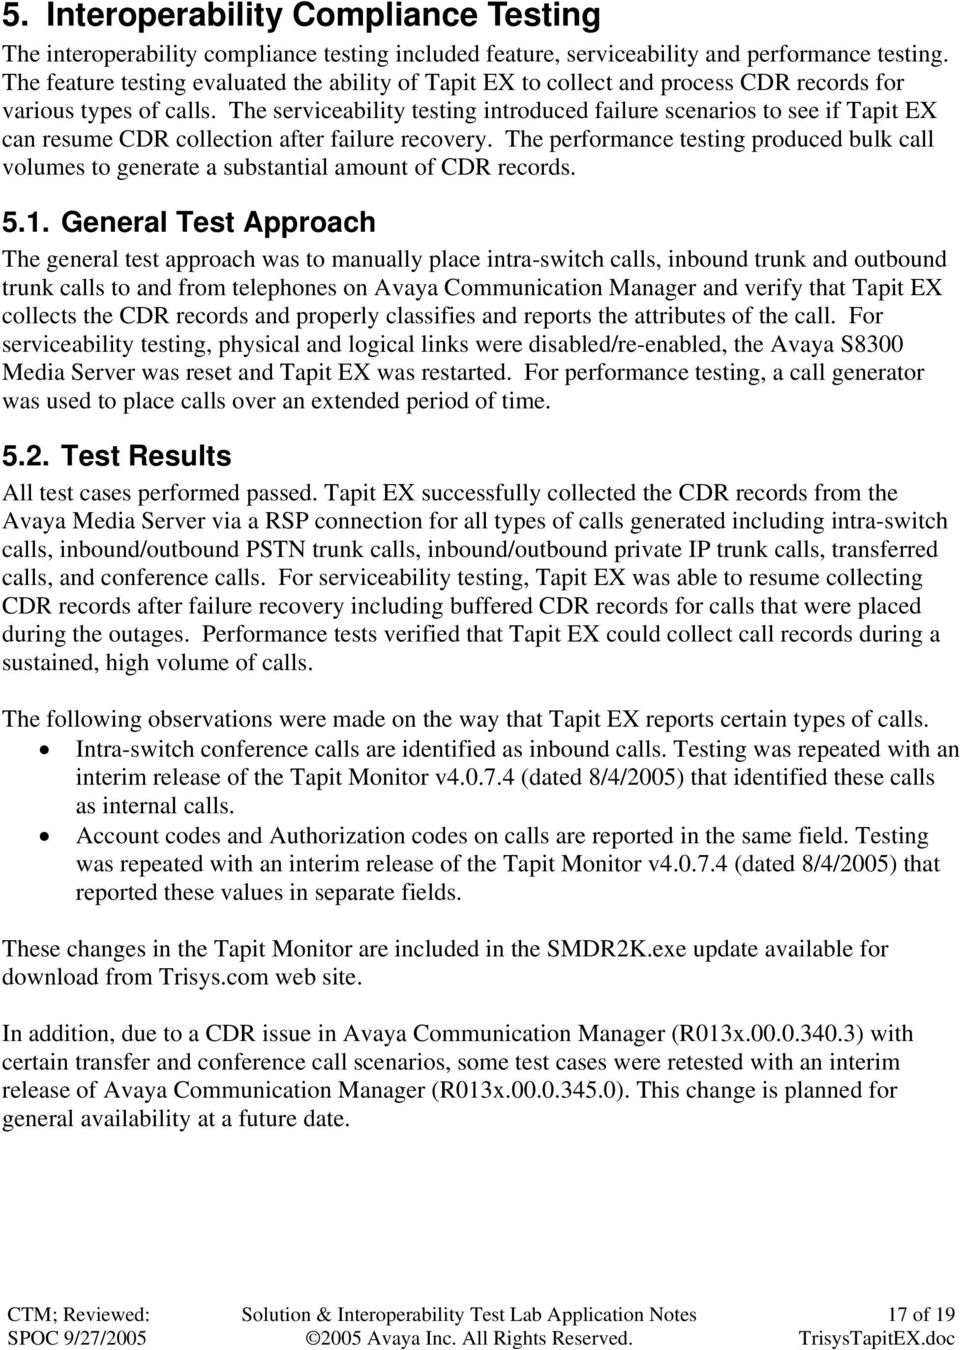 The serviceability testing introduced failure scenarios to see if Tapit EX can resume CDR collection after failure recovery.